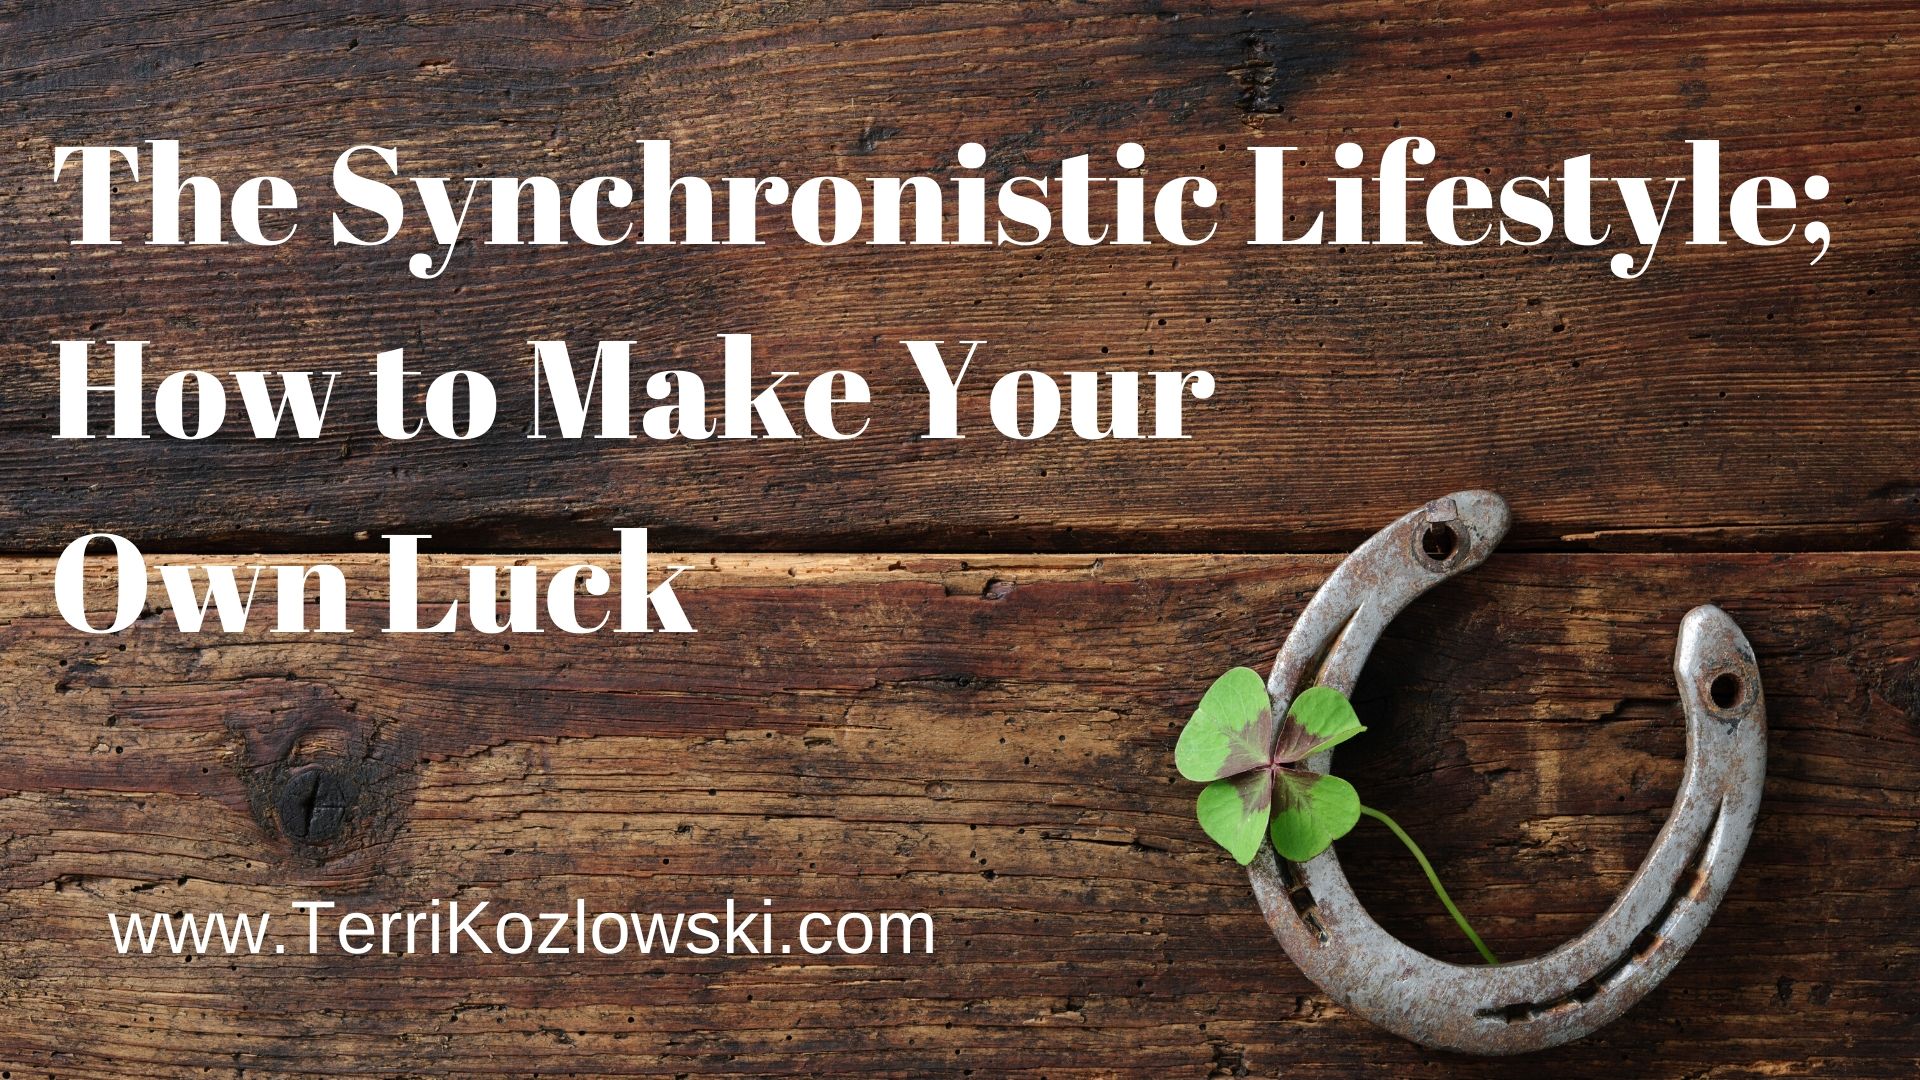 The Synchronistic Lifestyle; How to Make Your Own Luck